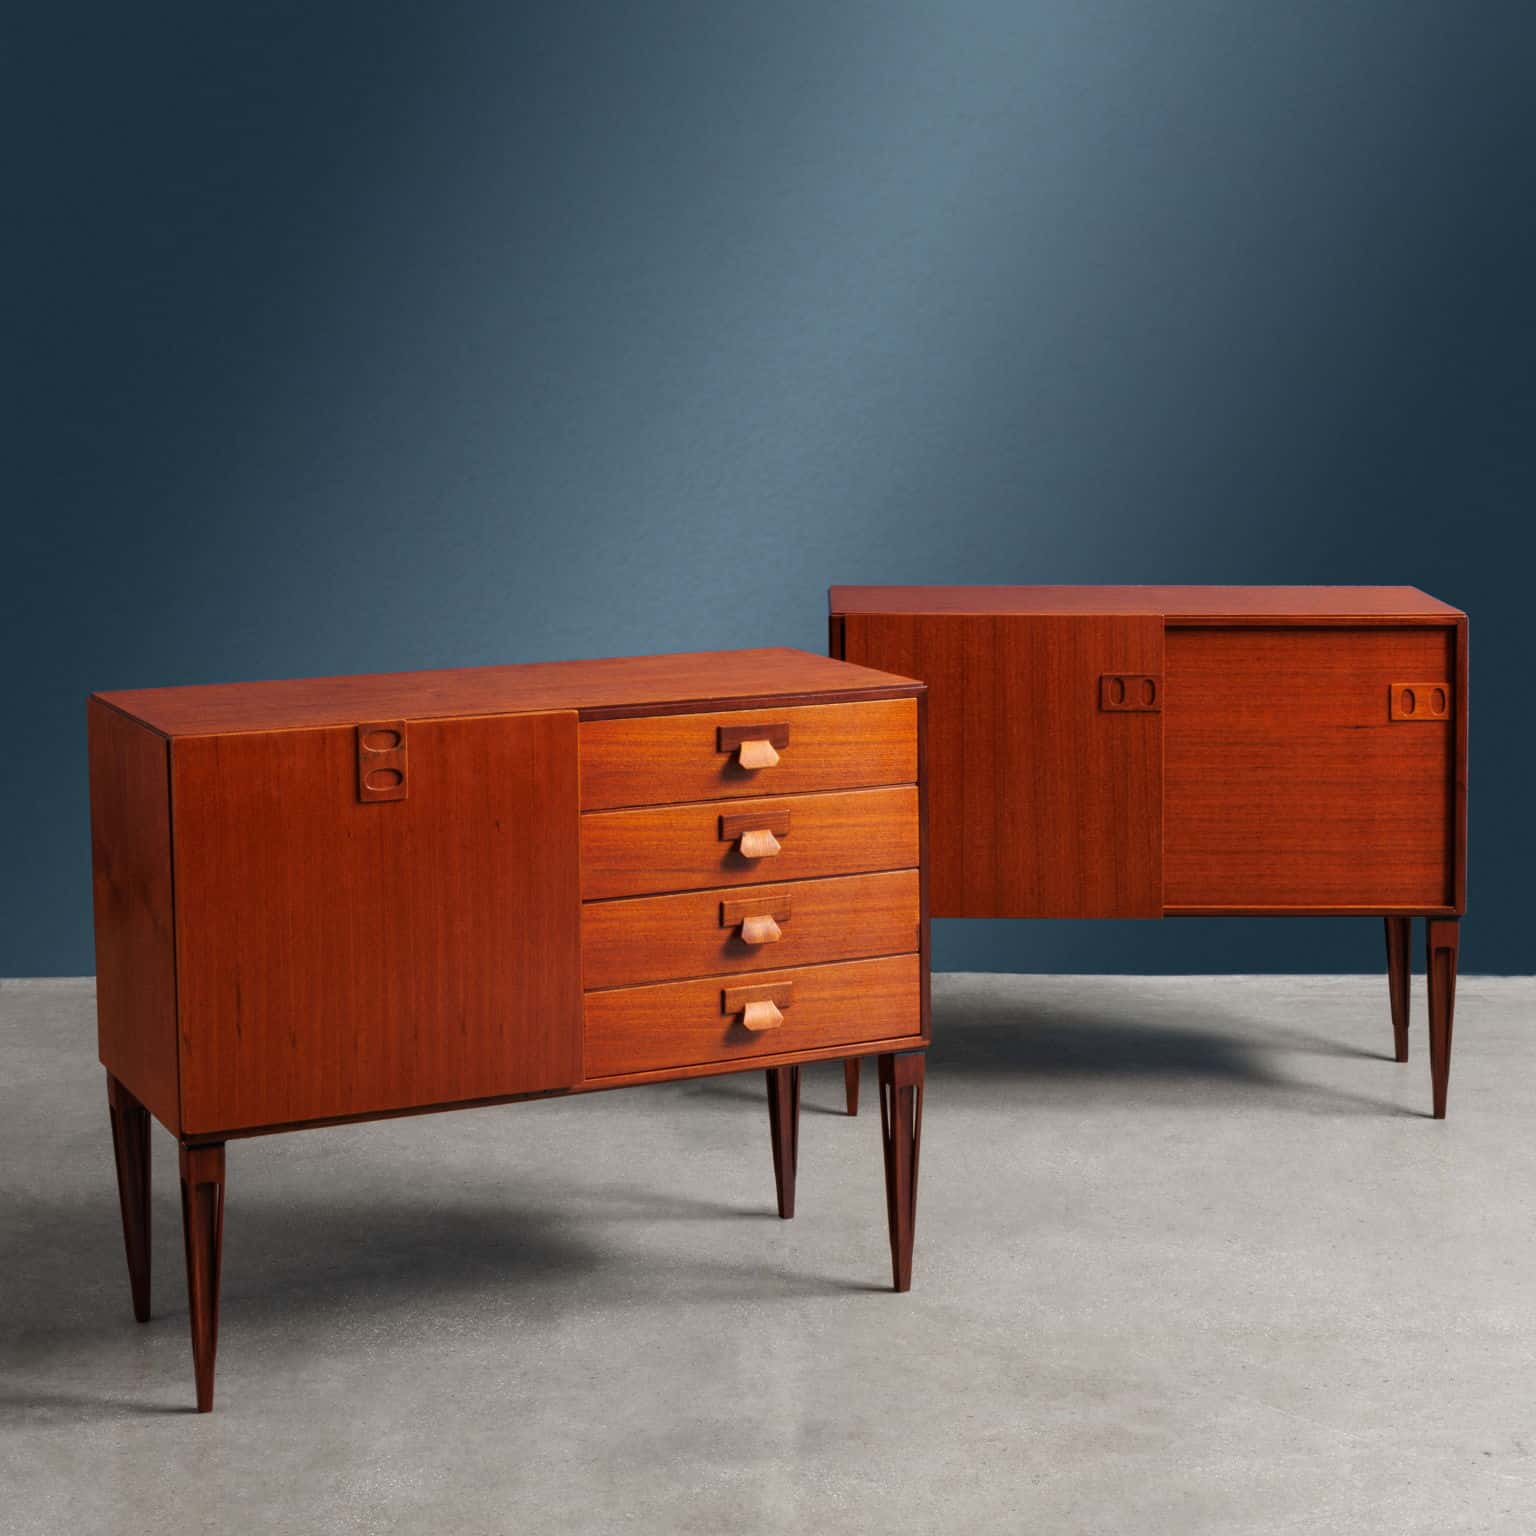 Two sideboards from the 1960s produced by Fratelli Proserpio